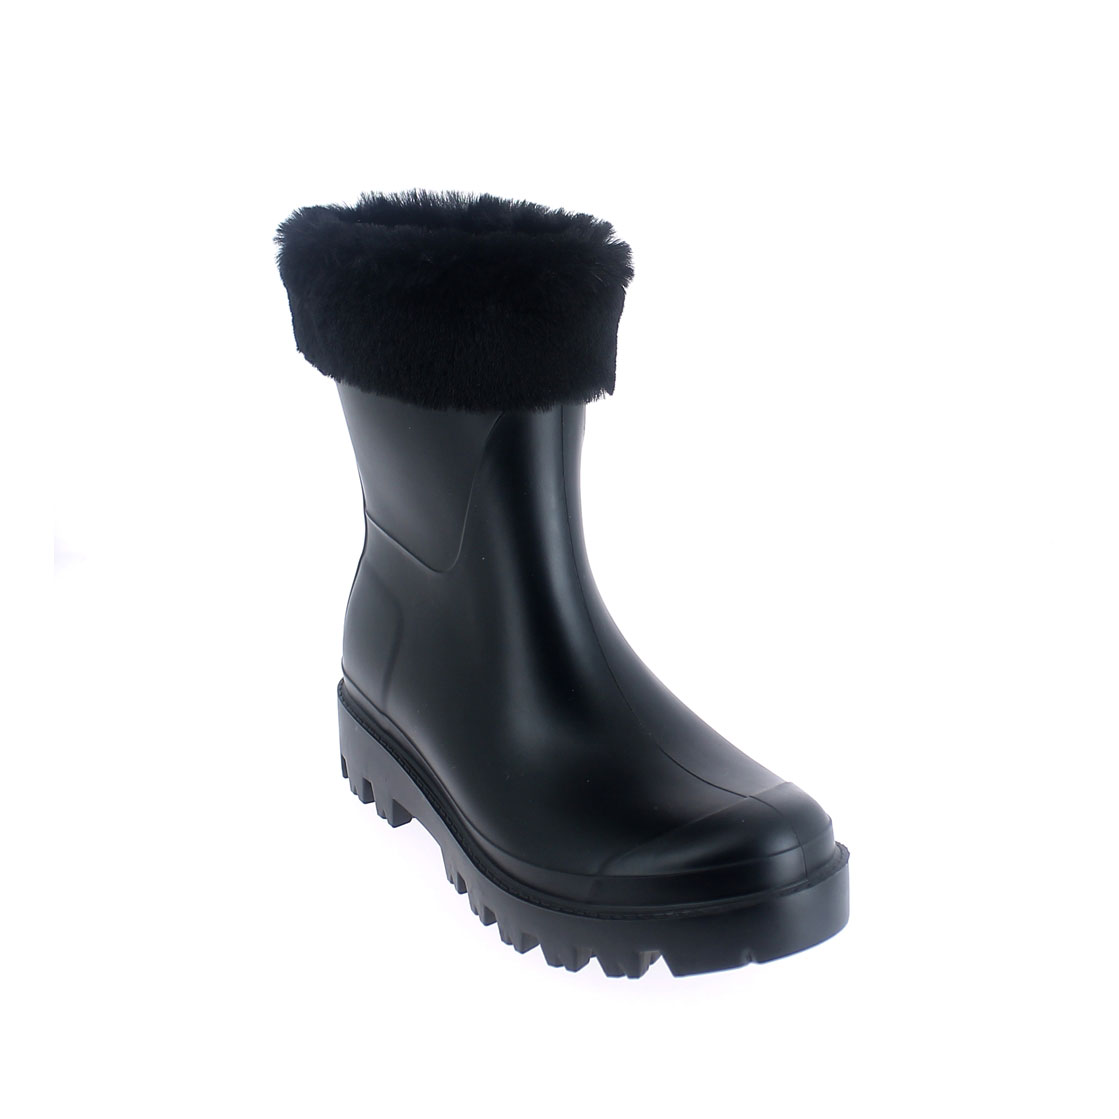 Wellington low boot in Black pvc with inner lining and cuff